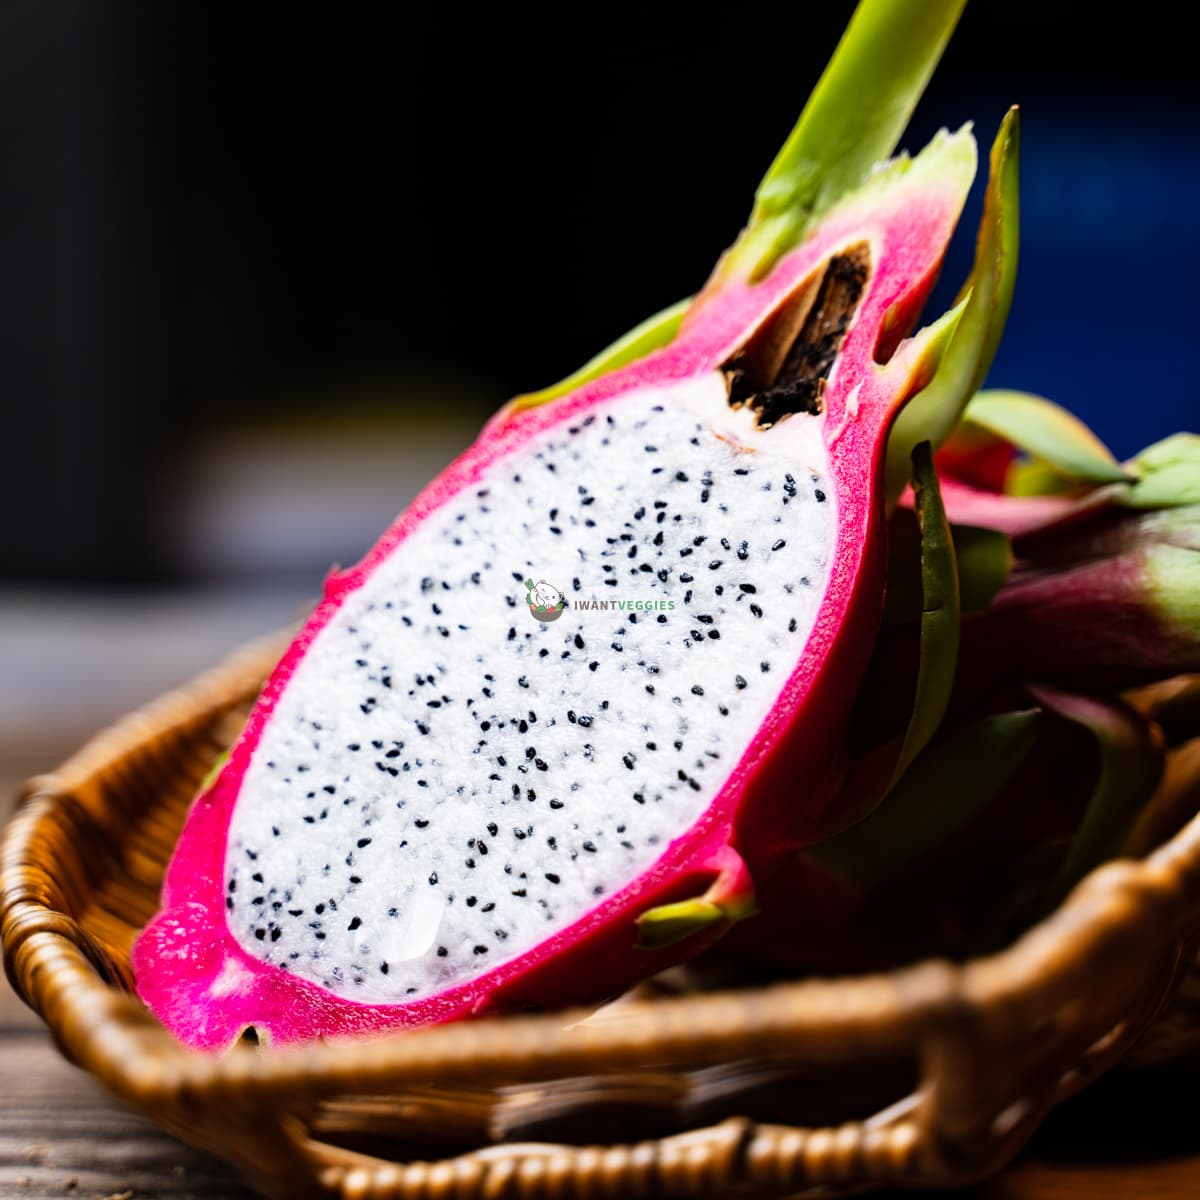 glistening white dragon fruit cut in half midsection